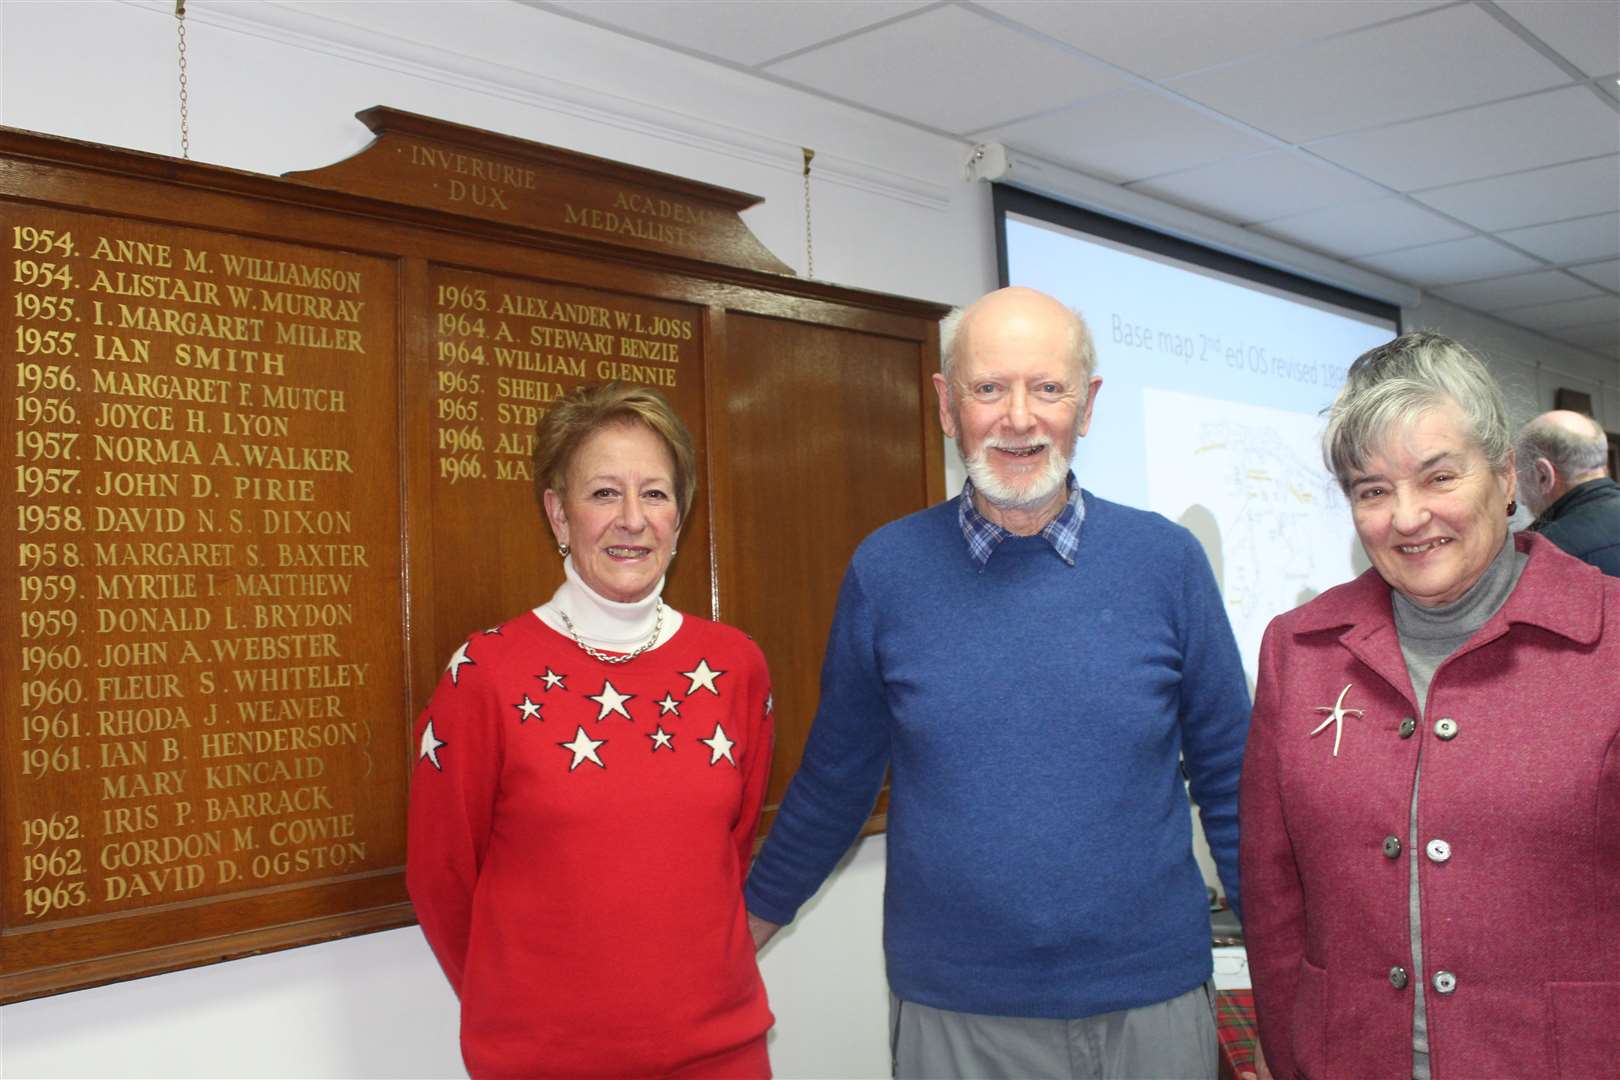 Garioch Heritage society president Nora Radcliffe (right) with guest Colin Miller and Sheila Tait who gave the vote of thanks at this weeks meeting at Garioch Heritage centre, Loco works road, Inverurie. Picture: Griselda McGregor